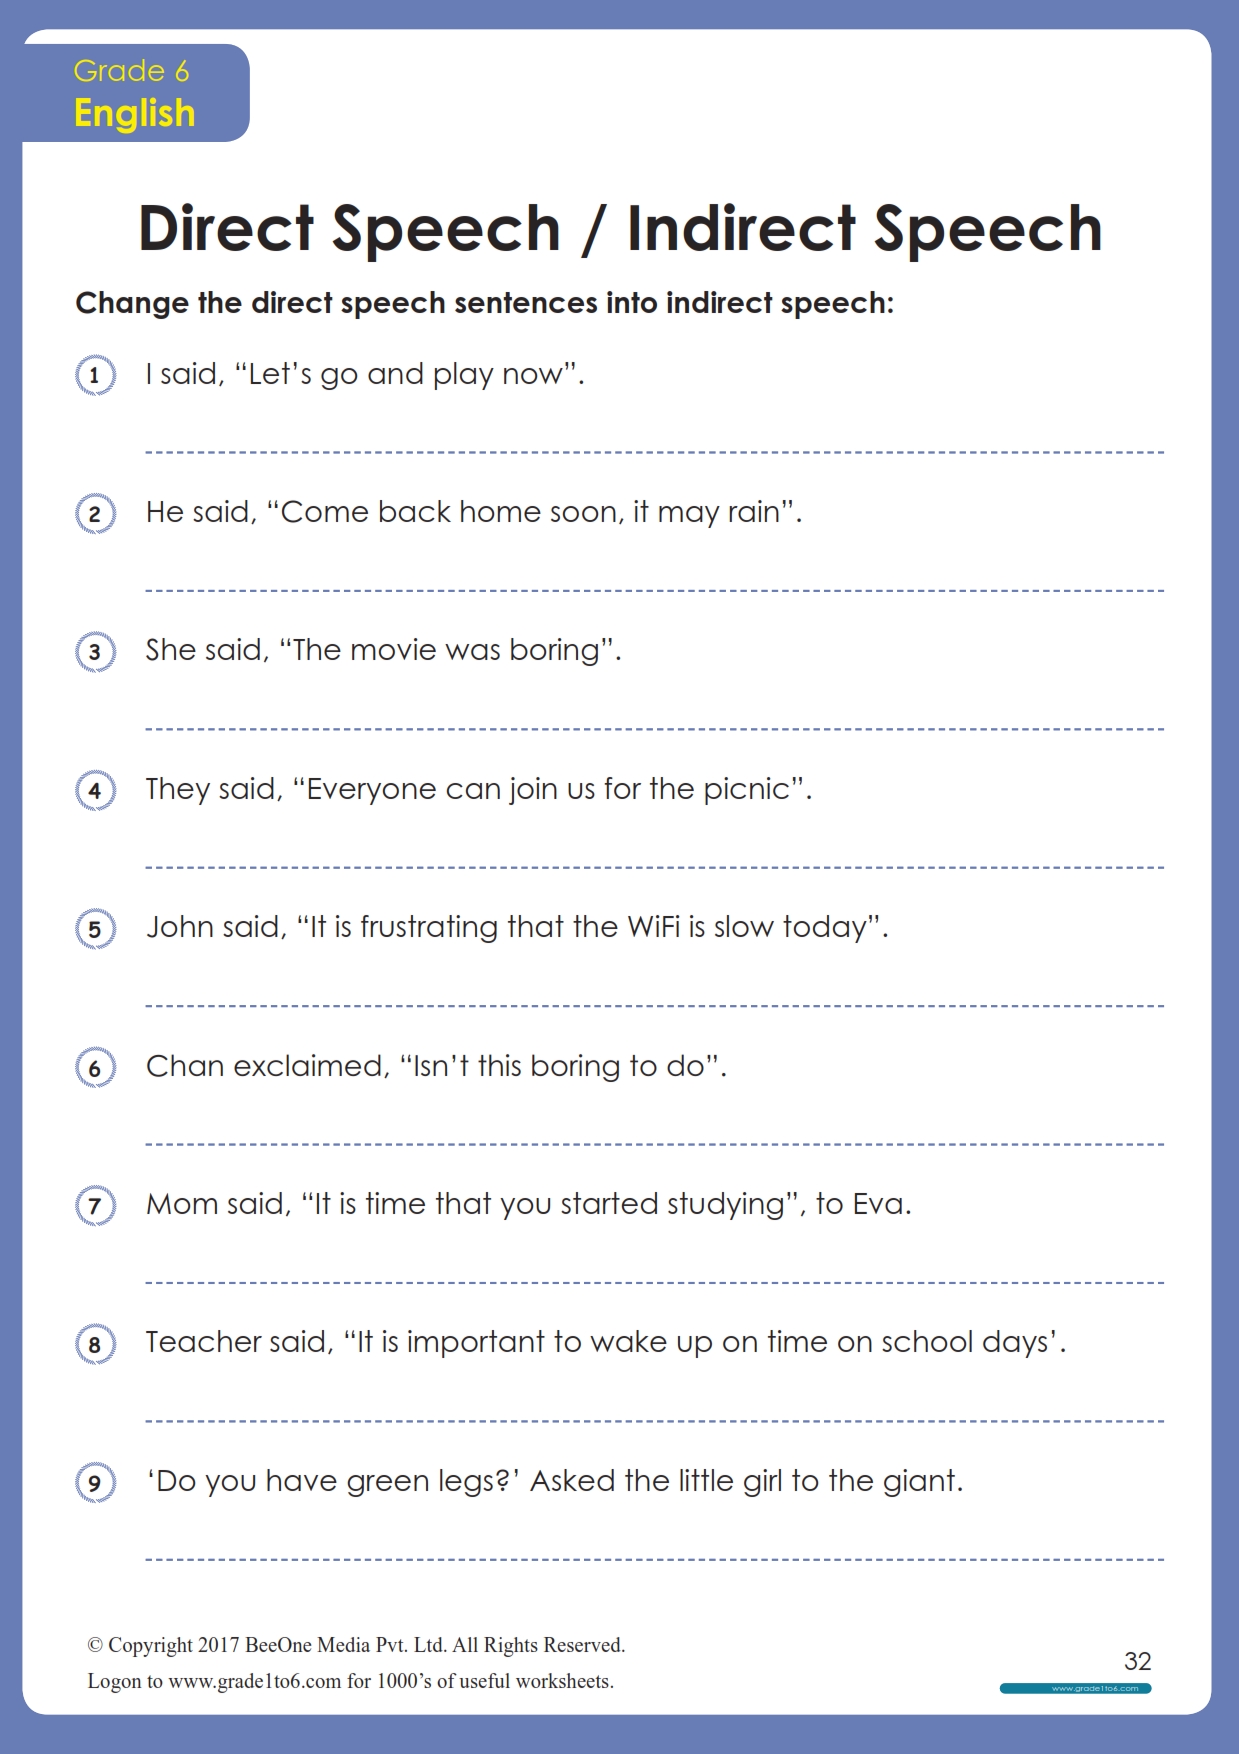 direct and indirect speech worksheet byjus